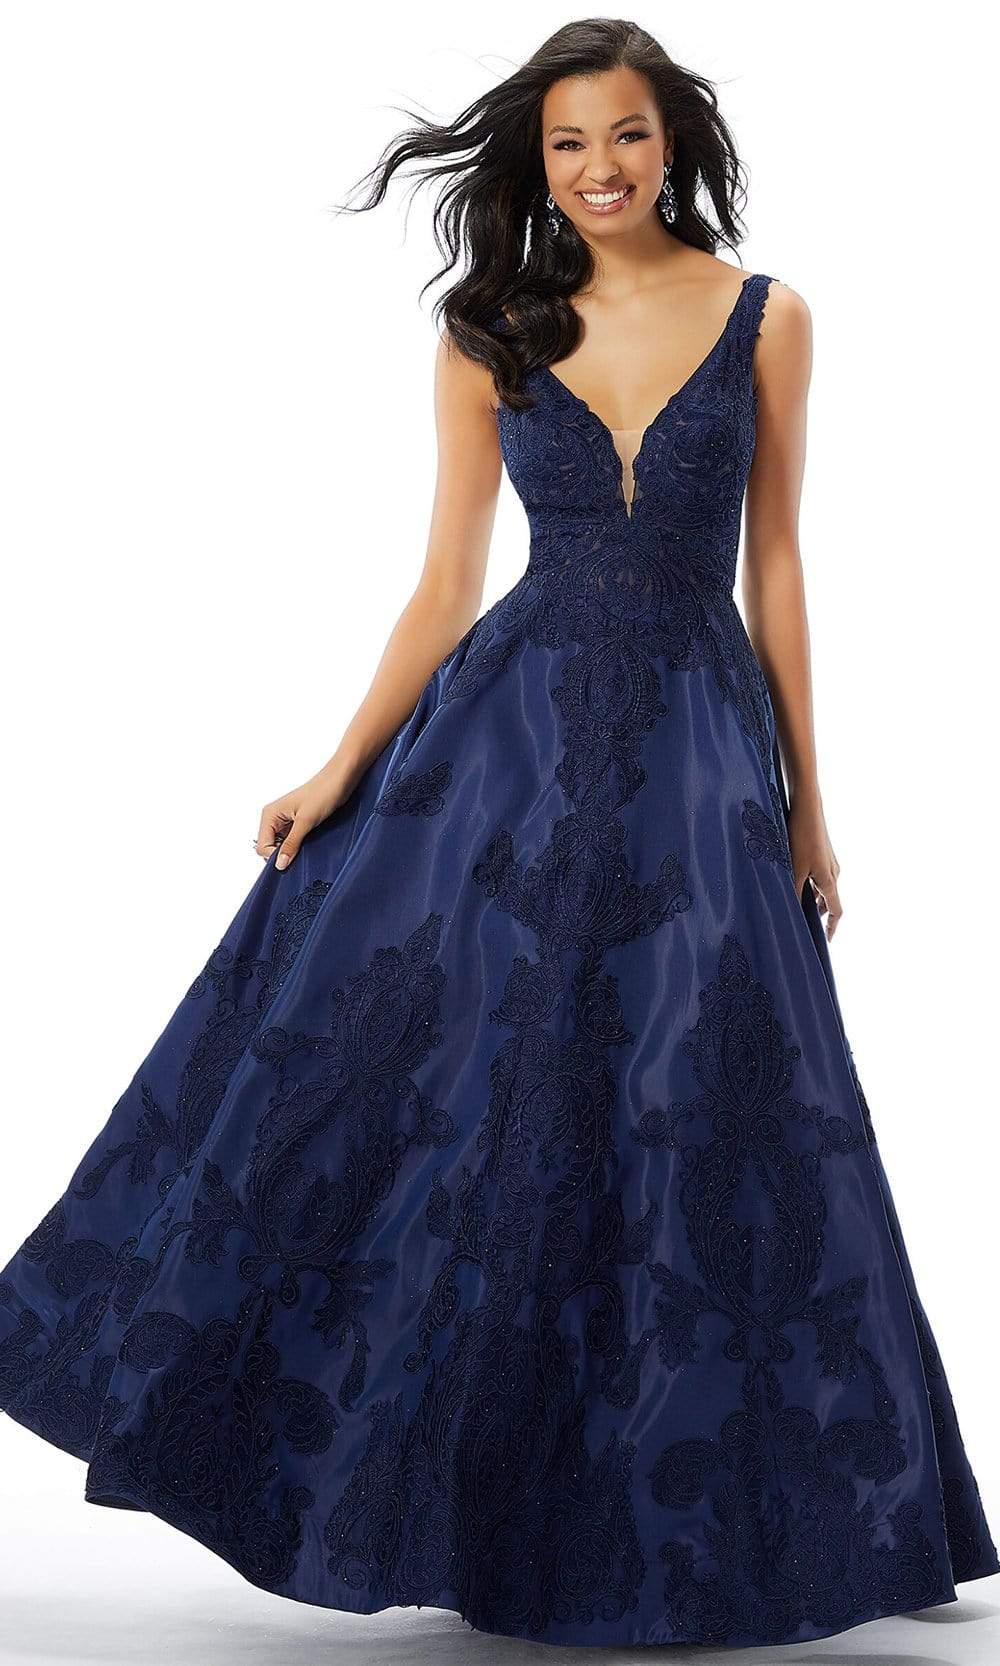 Mori Lee - 43089 Sleeveless V Neck Beaded Lace Appliques Satin Gown Prom Dresses 0 / Navy